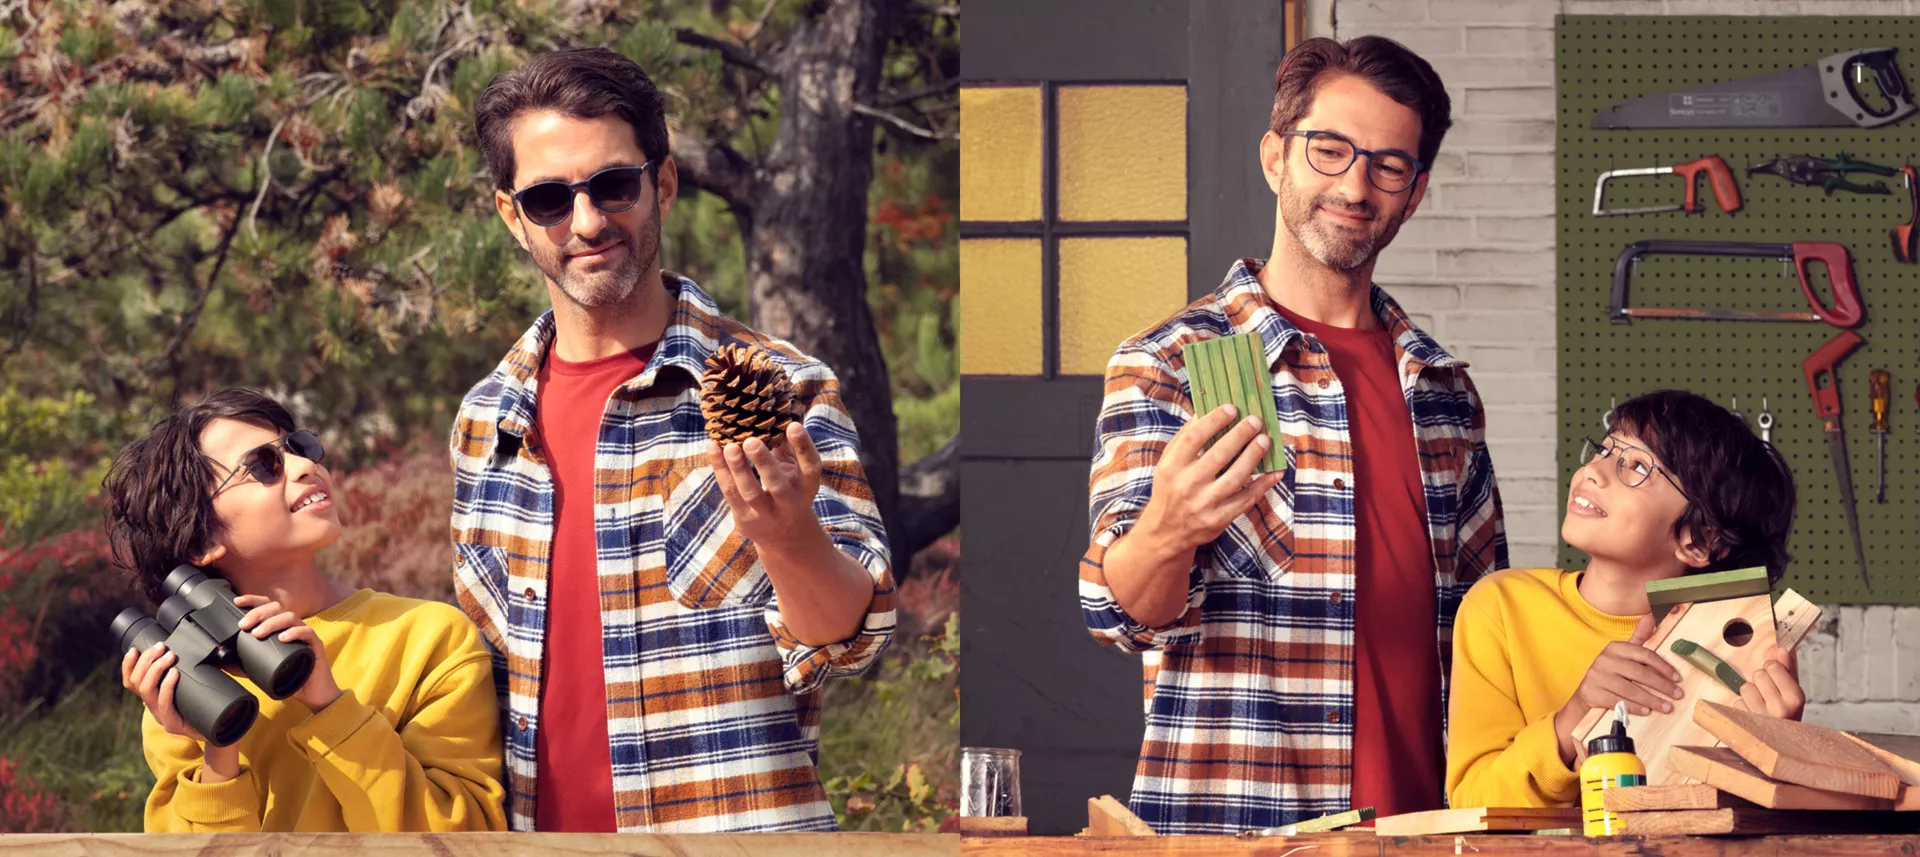 Two-pane image showing a man and boy engaged in outdoor activities. Left pane: The boy holds binoculars and looks up at the man who is showing a pine cone. Right pane: Indoors, the boy looks at the man while holding a wooden birdhouse, with a wall of hanging tools in the background. Both are smiling and wearing casual attire.